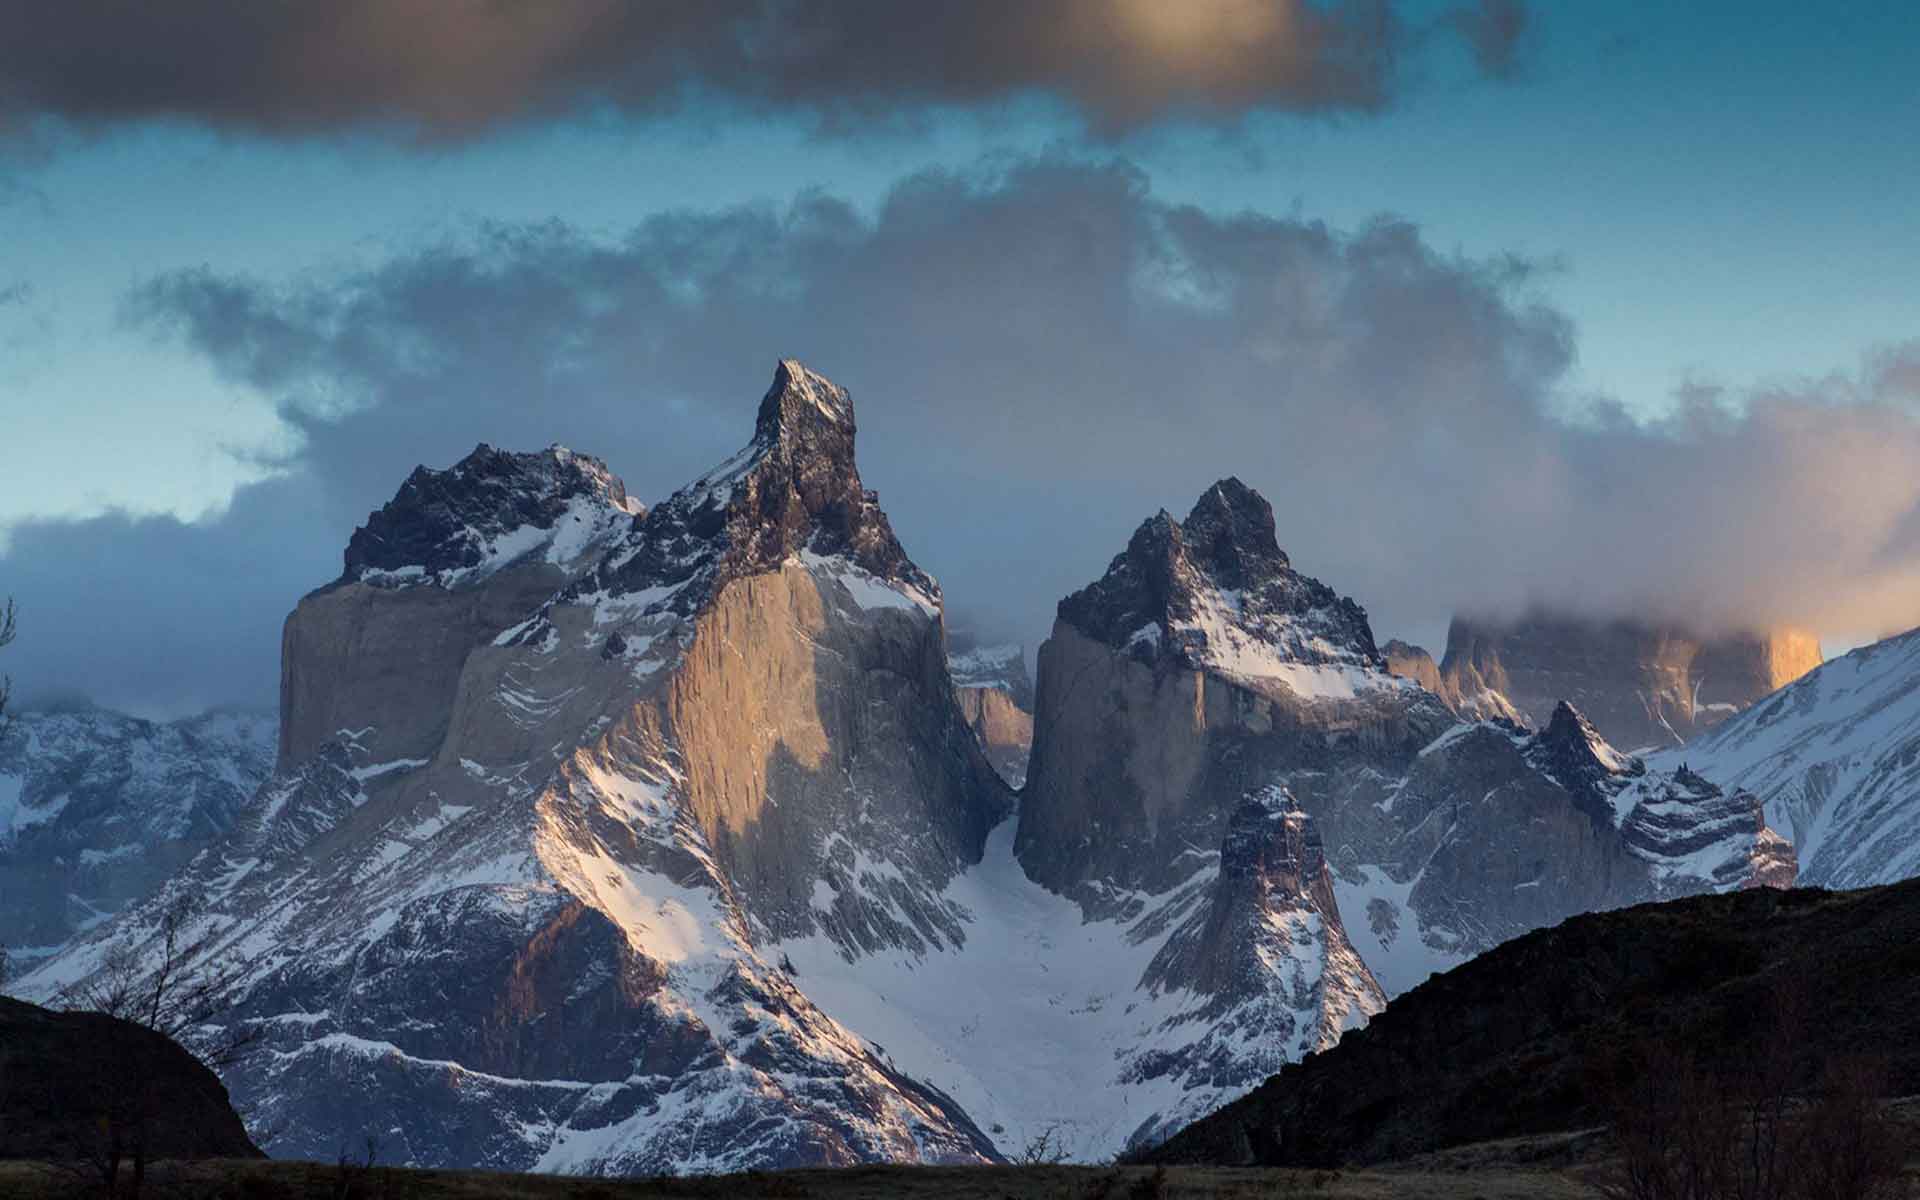 General view of the Cuernos del Paine peaks